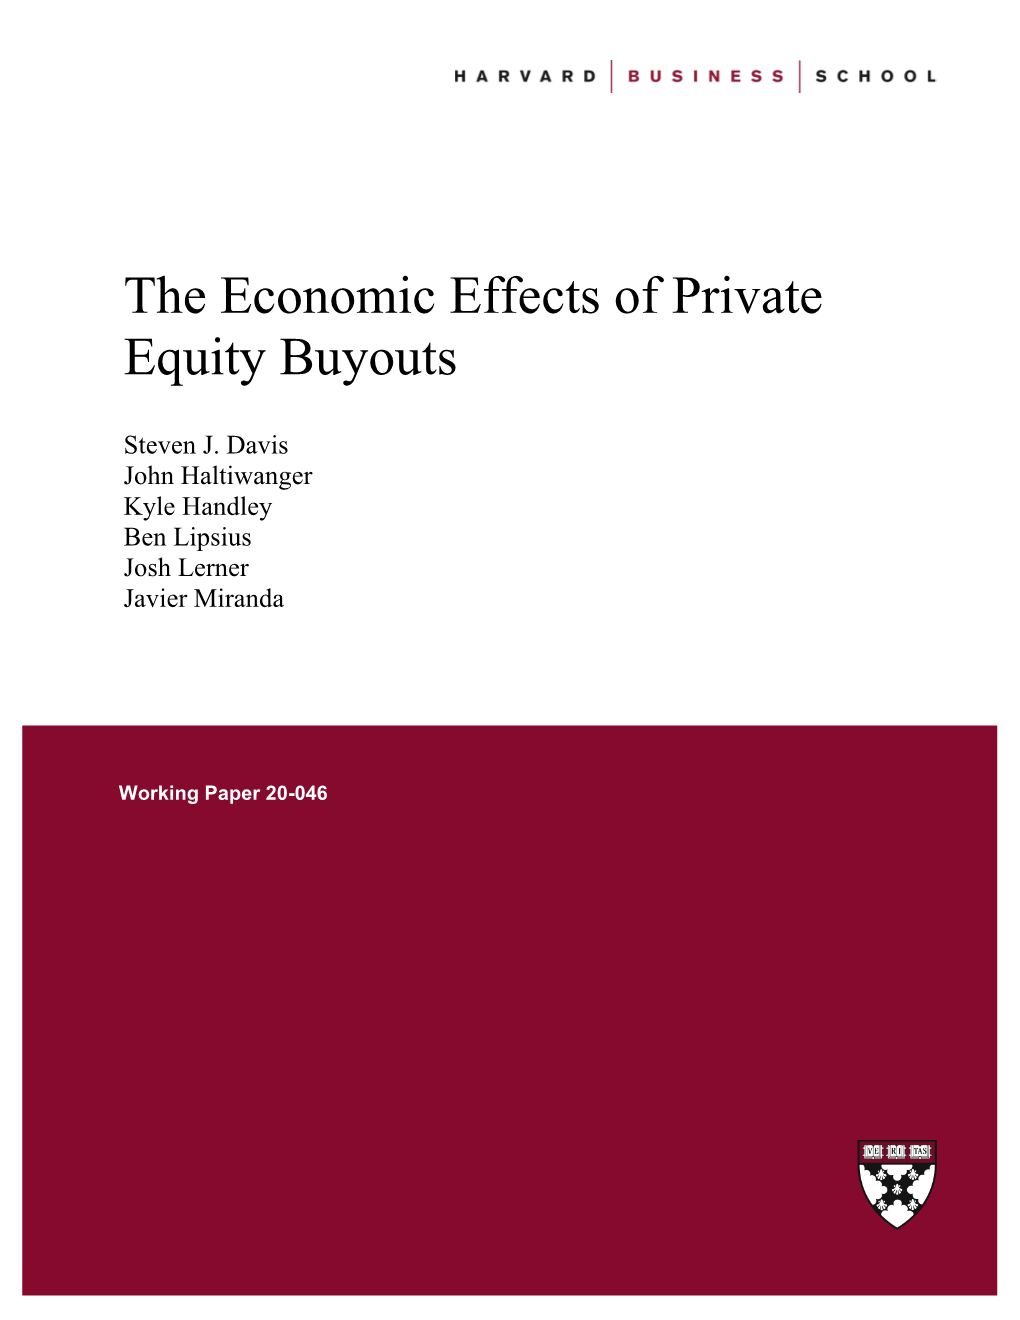 The Economic Effects of Private Equity Buyouts